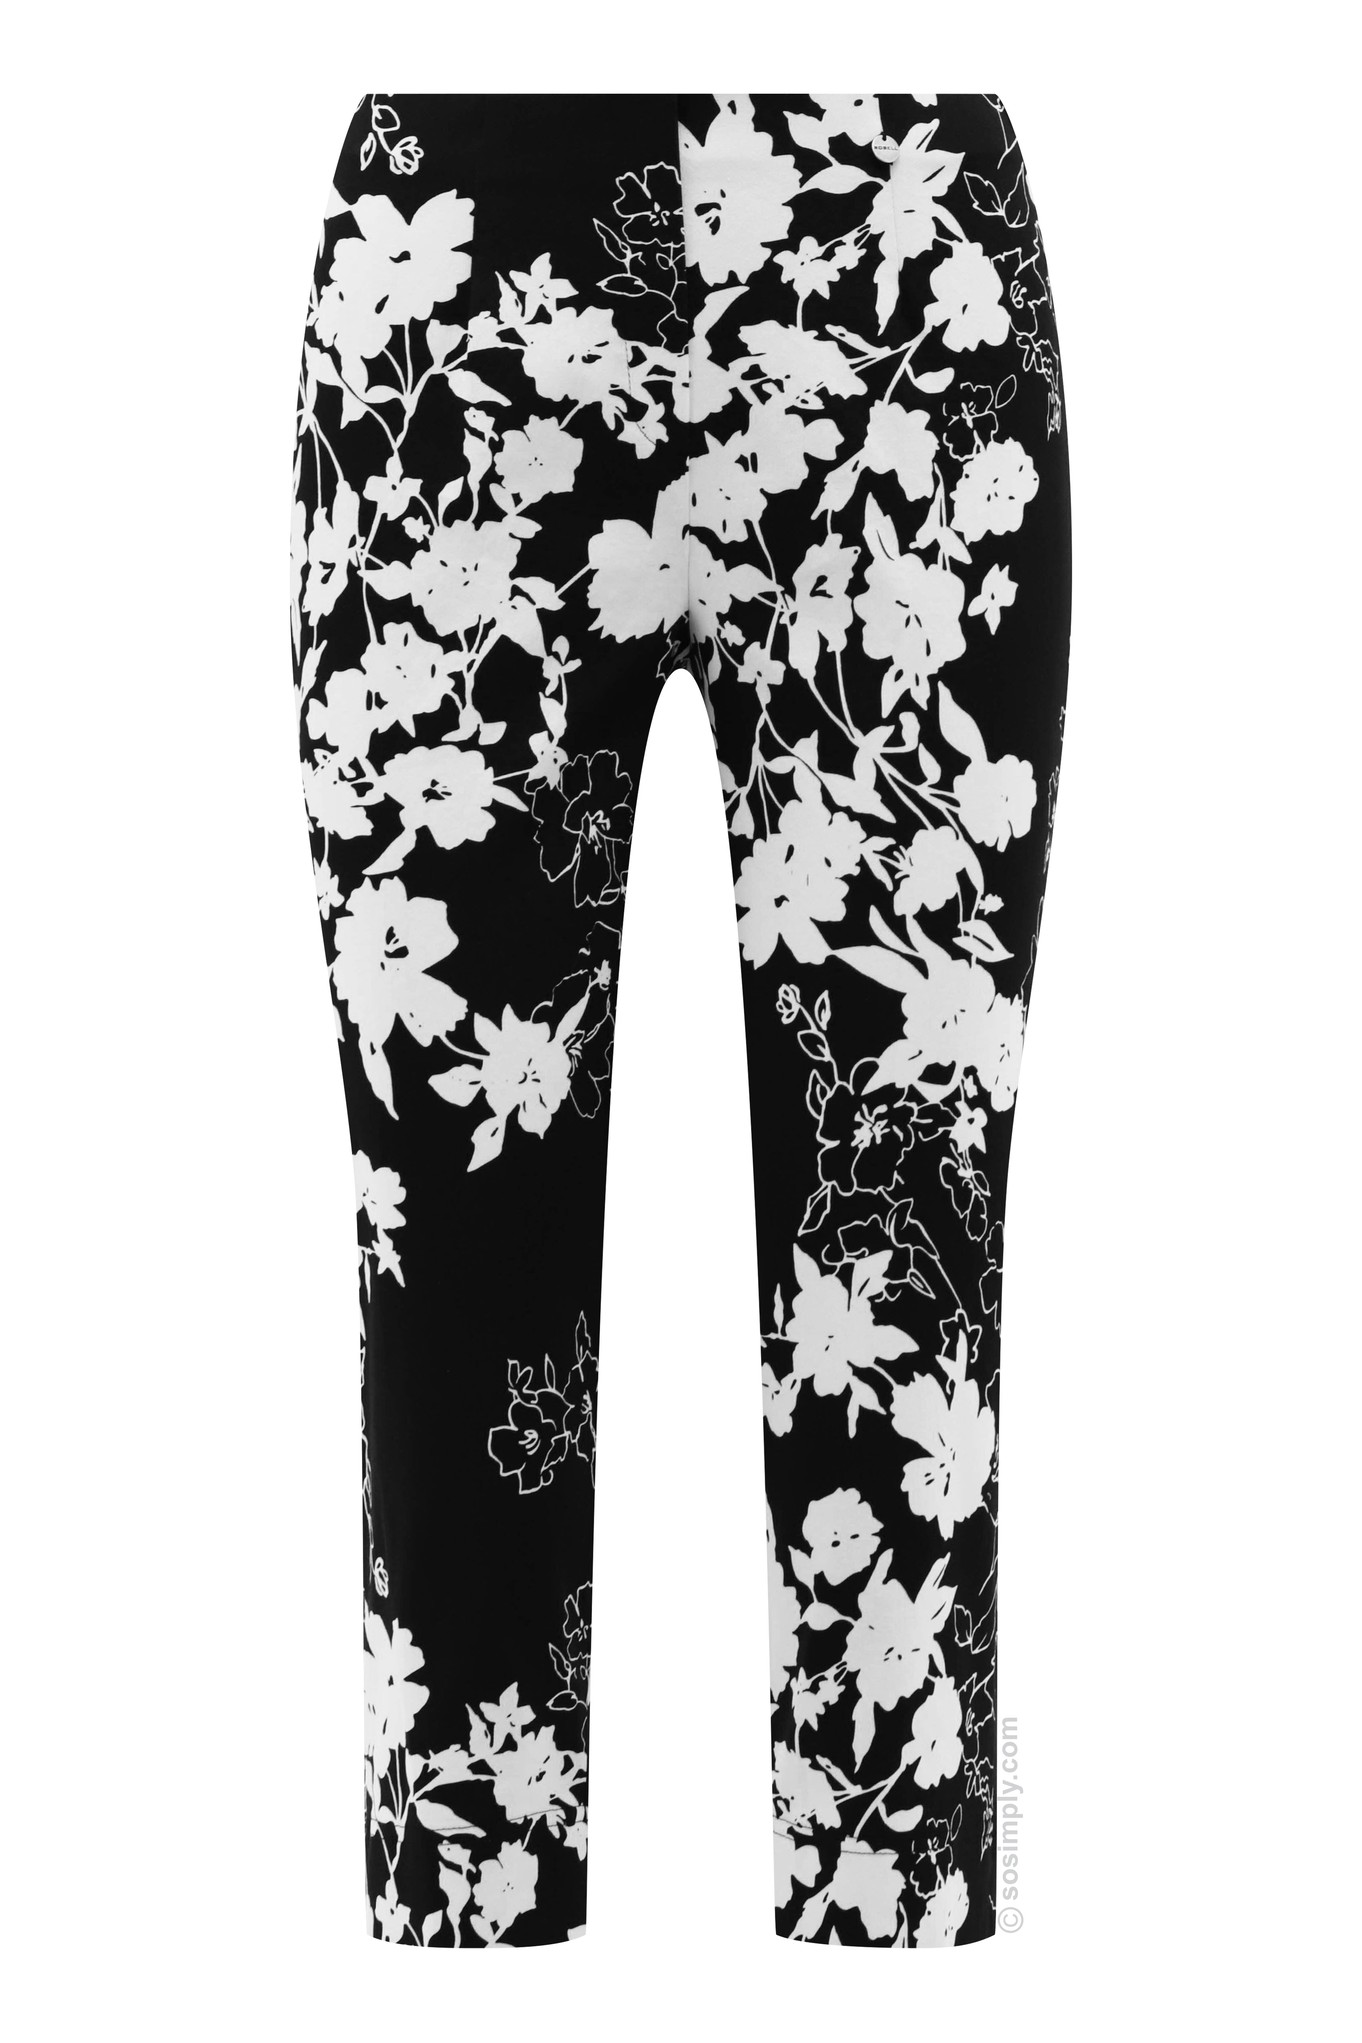 Robell Marie 07 Mono Floral Print Crop